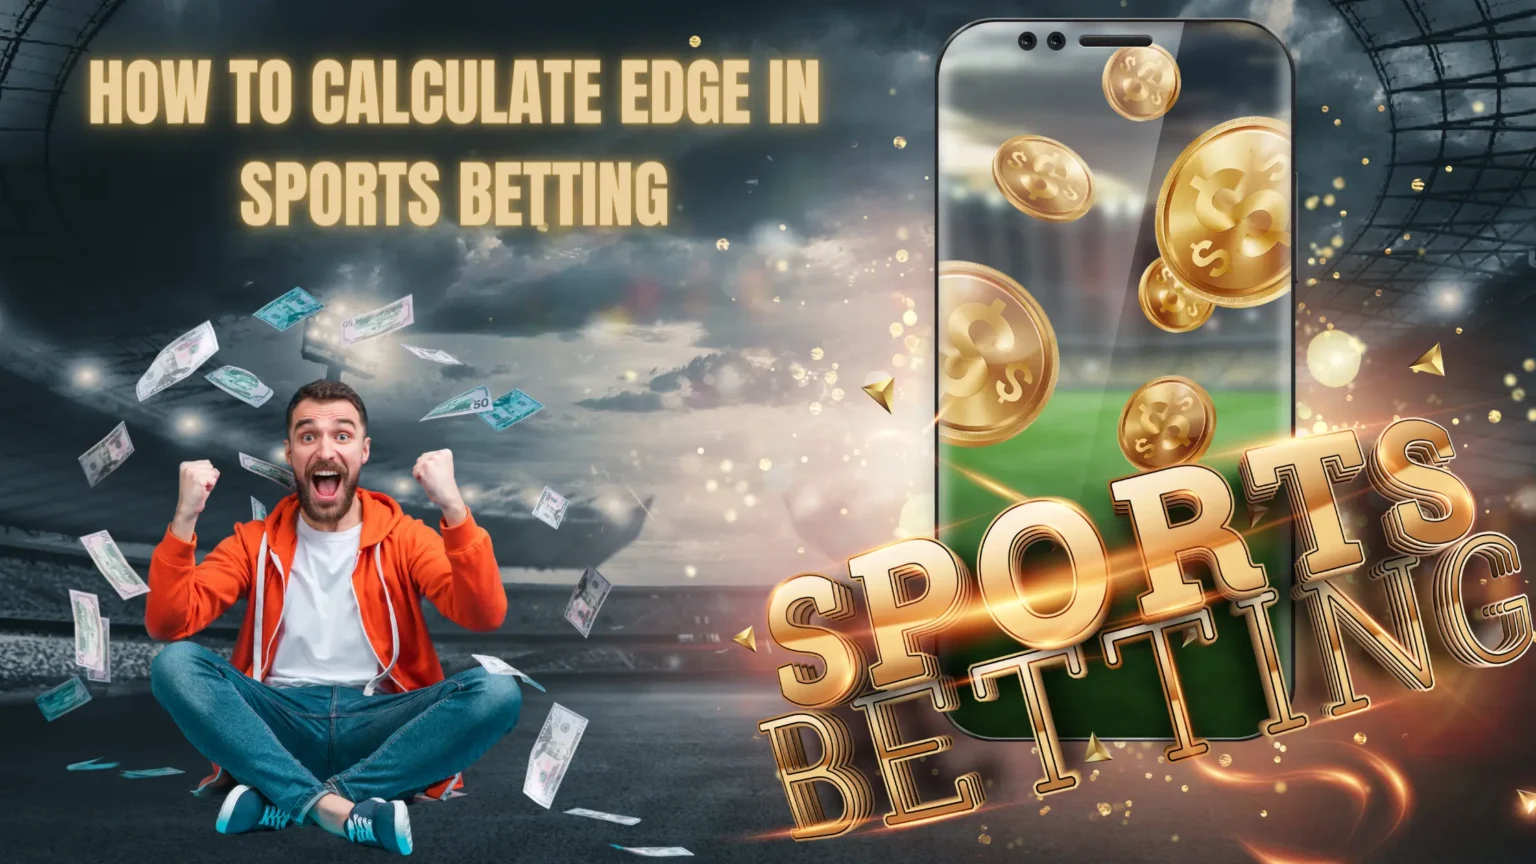 How to Calculate edge in Sports Betting